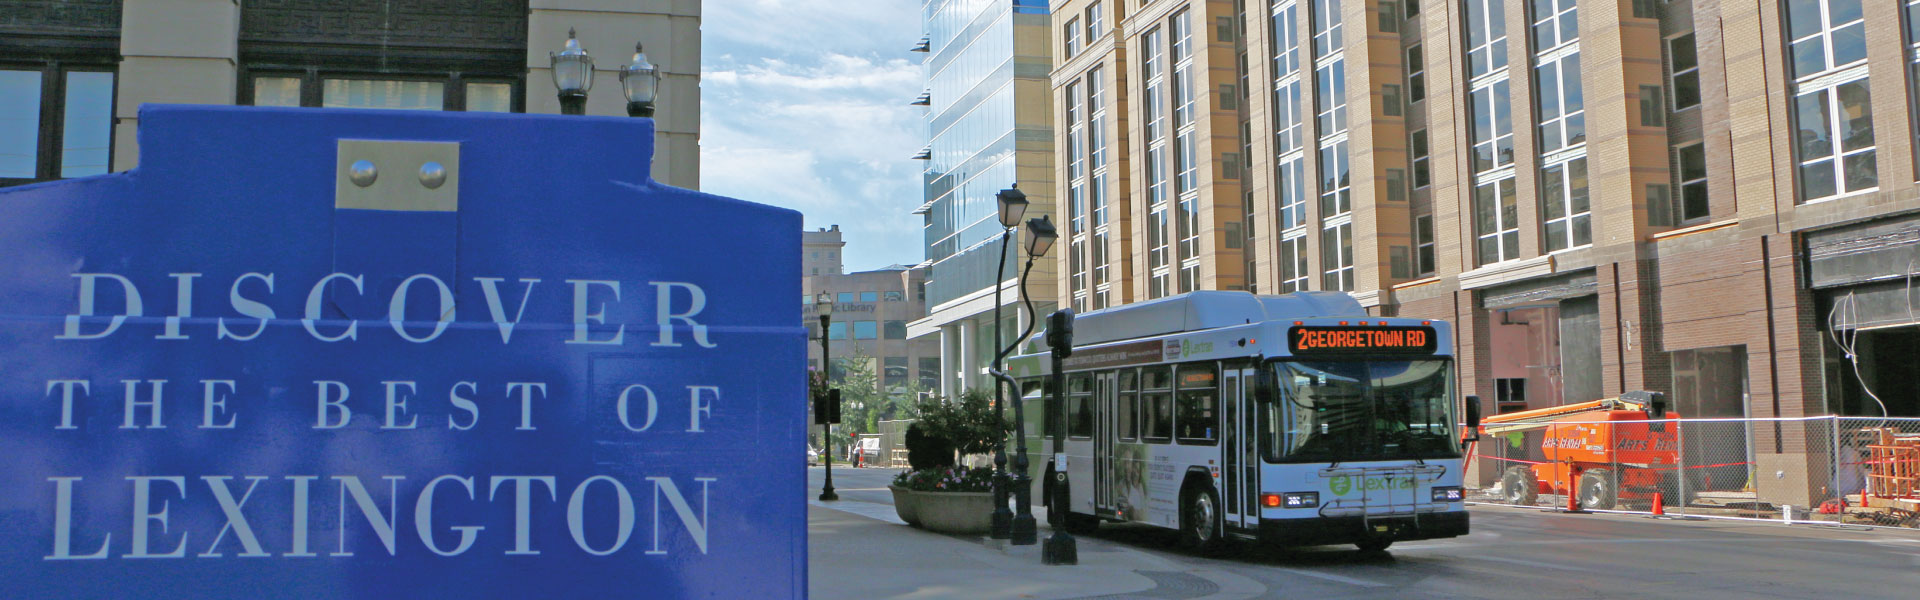 A sign that says "discovery the best of lexington" and a bus in the background.